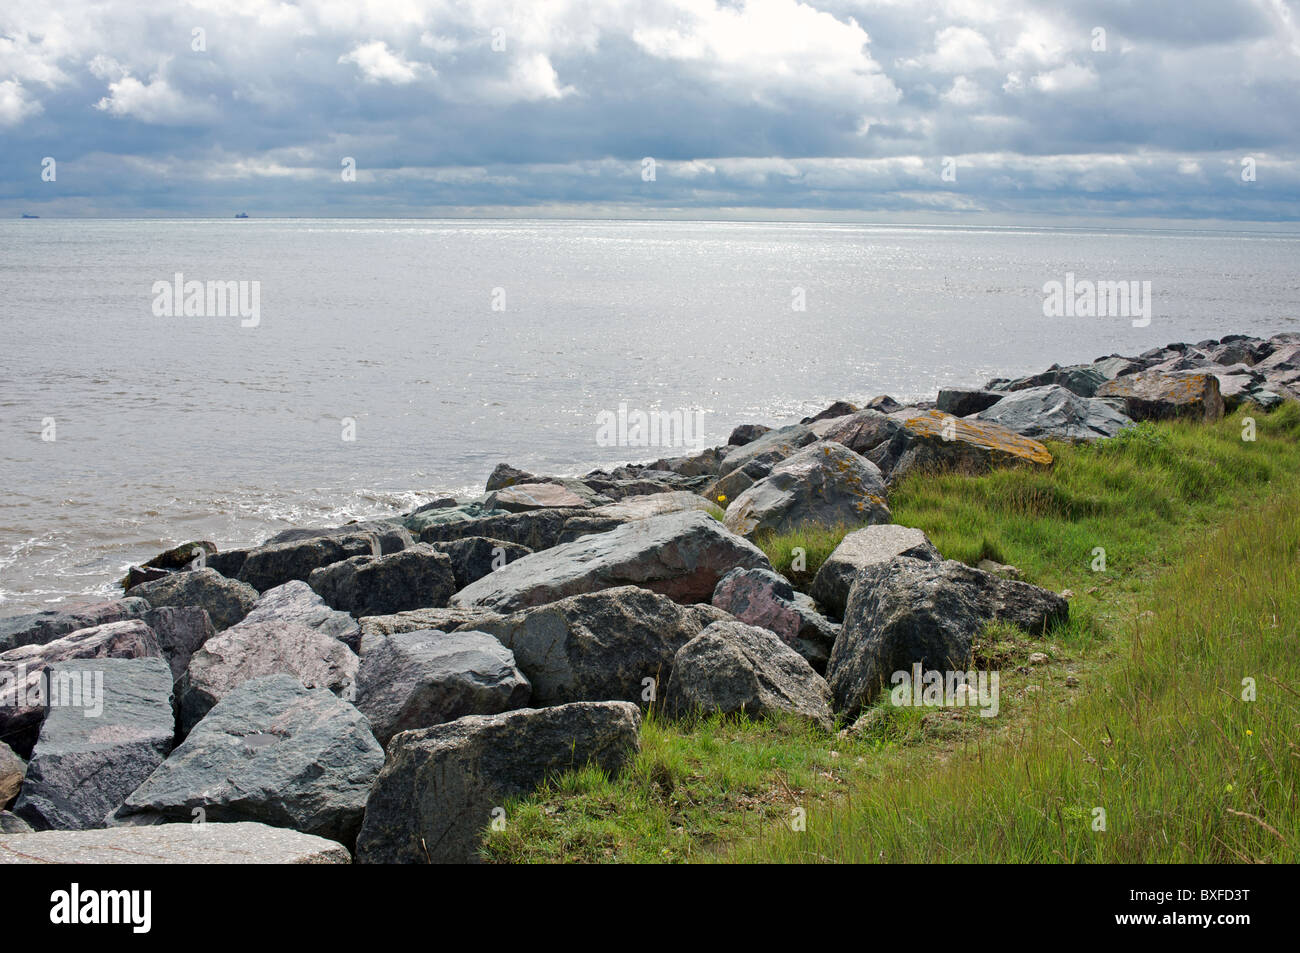 Rock armour protecting coastline from erosion Stock Photo